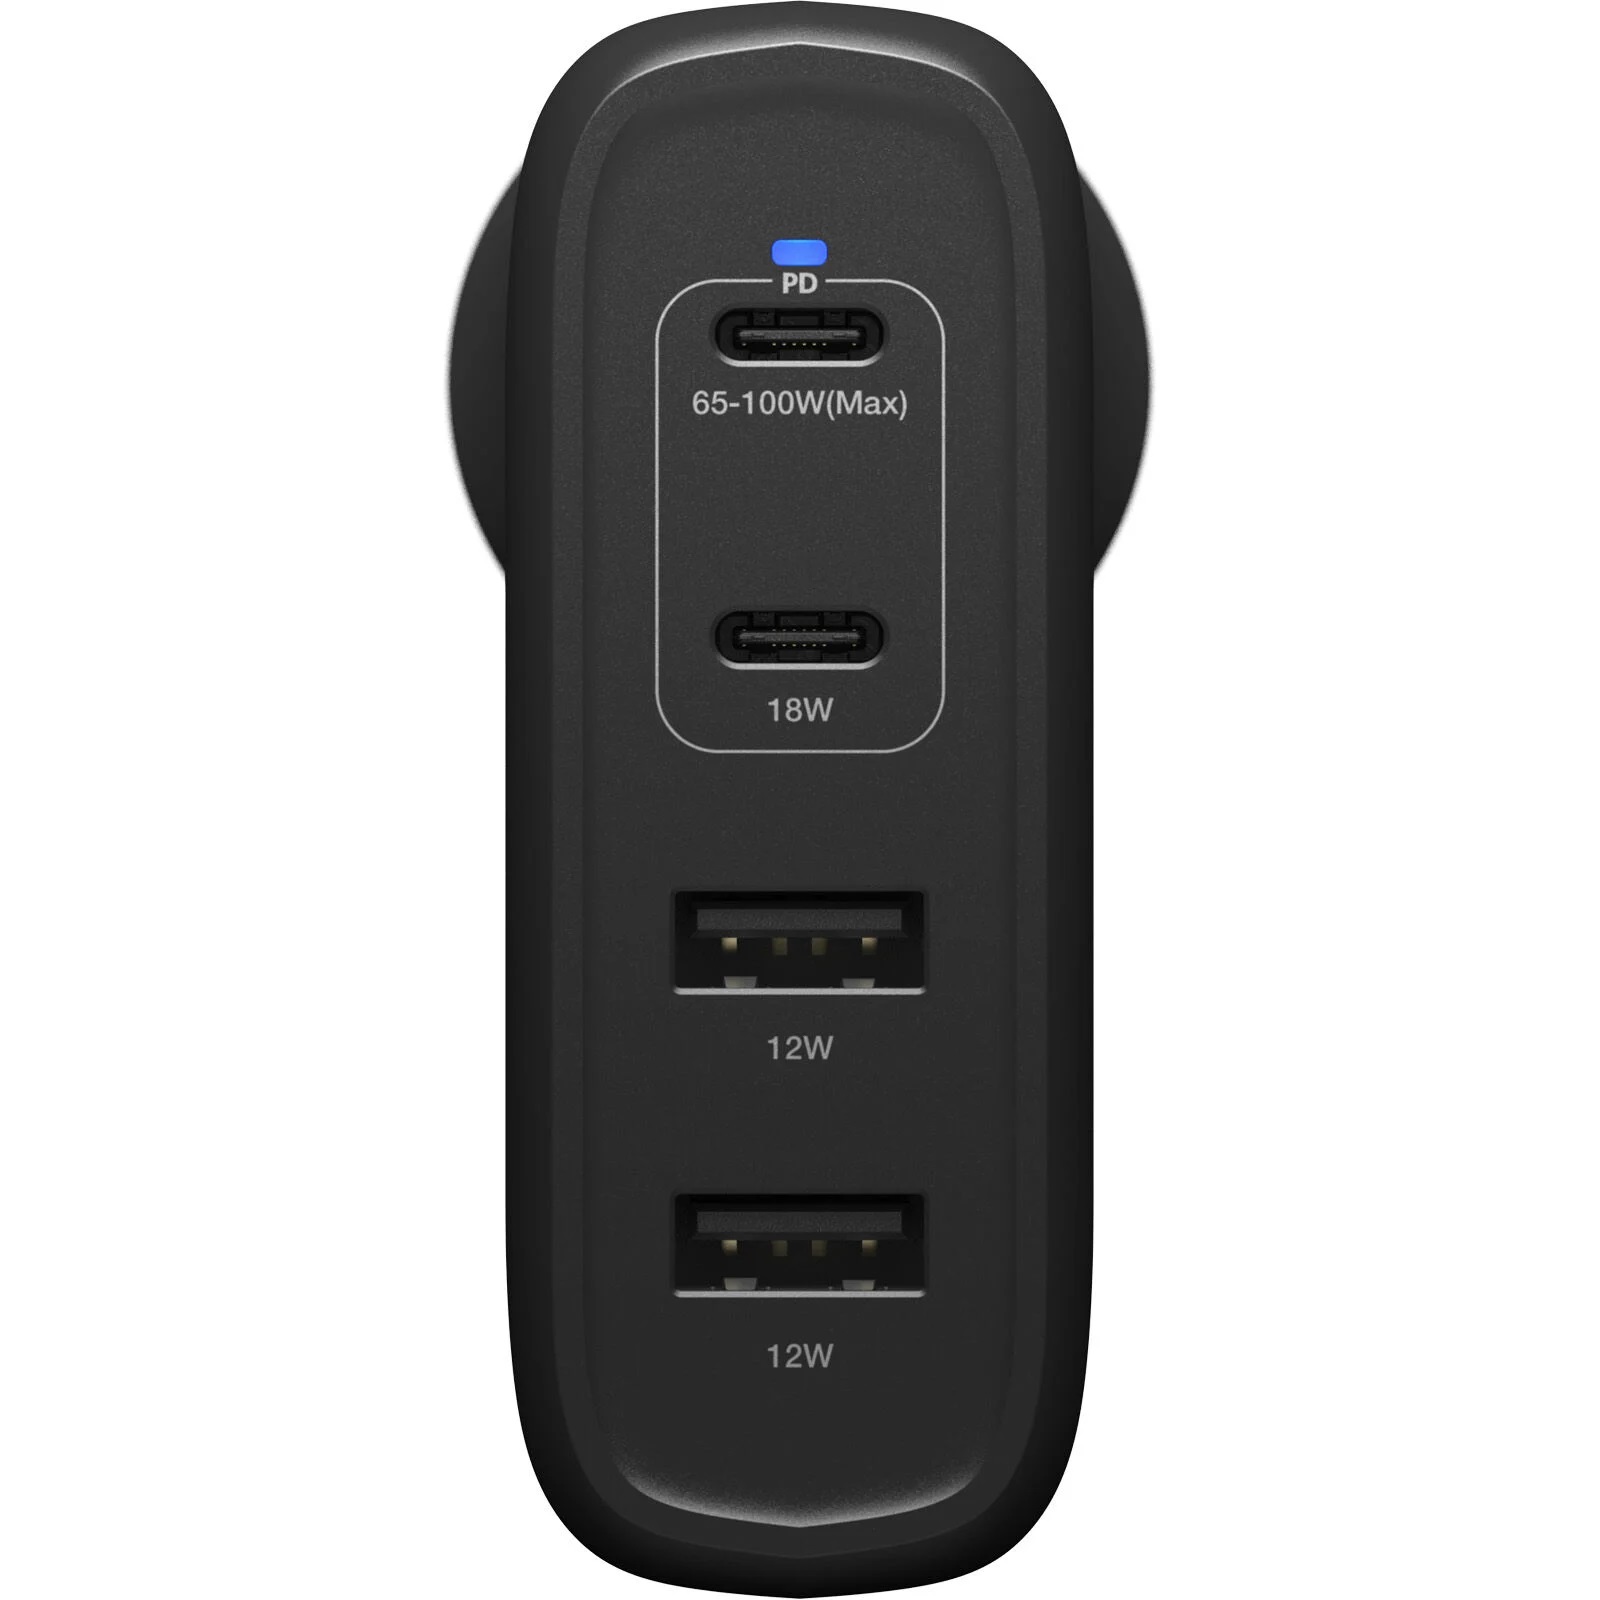 OtterBox 100W Four Port USB-C (Type I) PD Fast GaN Wall Charger – Black (78-81355), Dual USB-C (100W+18W), Dual USB-A (18W), Compact, Laptop Charger